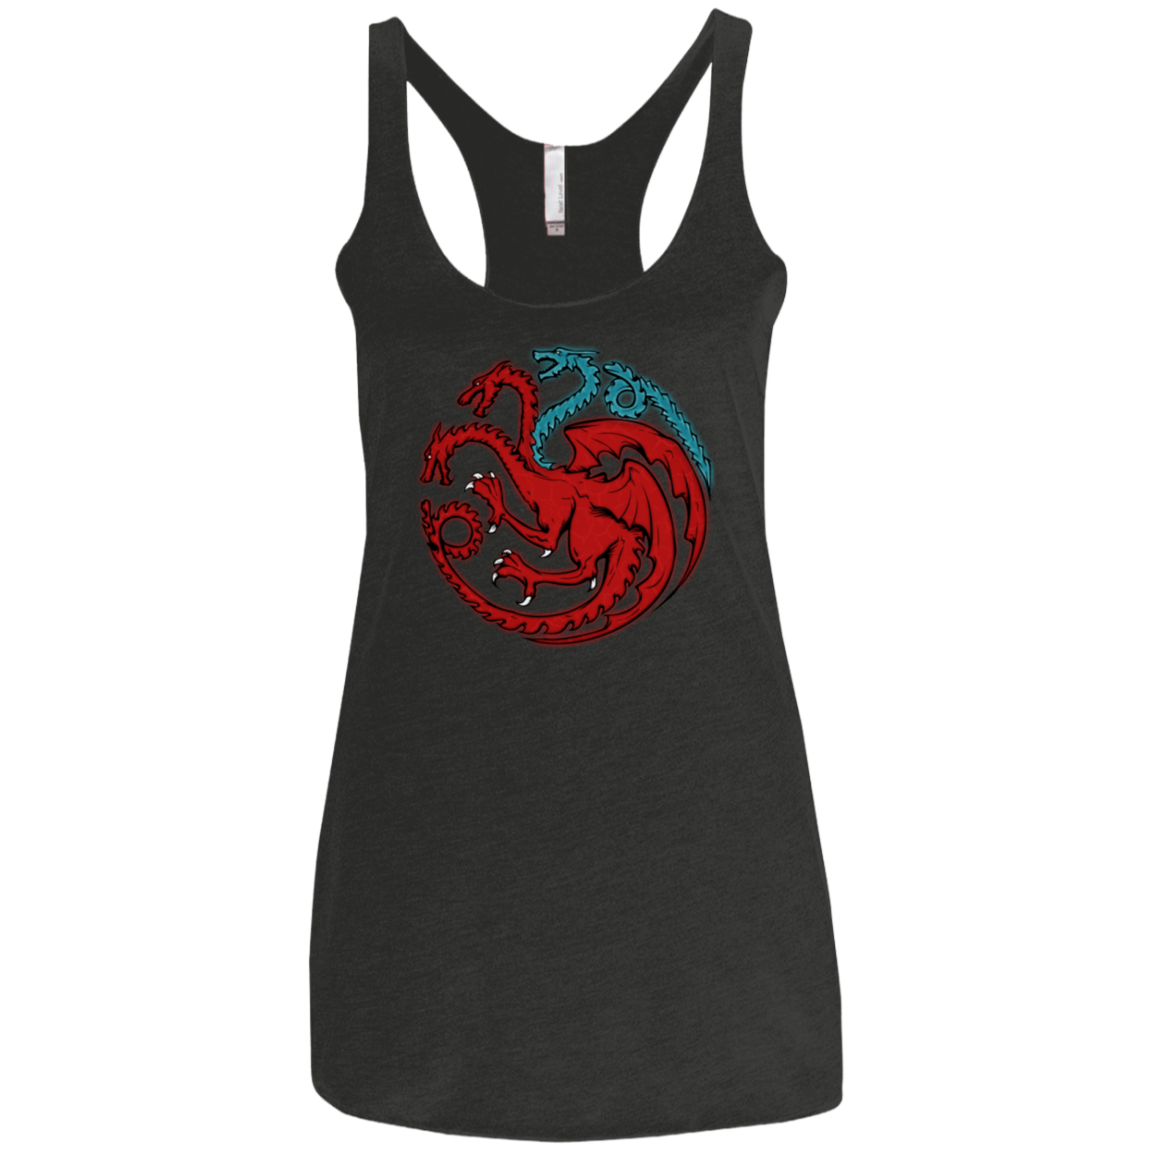 Trinity of fire and ice V2 Women's Triblend Racerback Tank